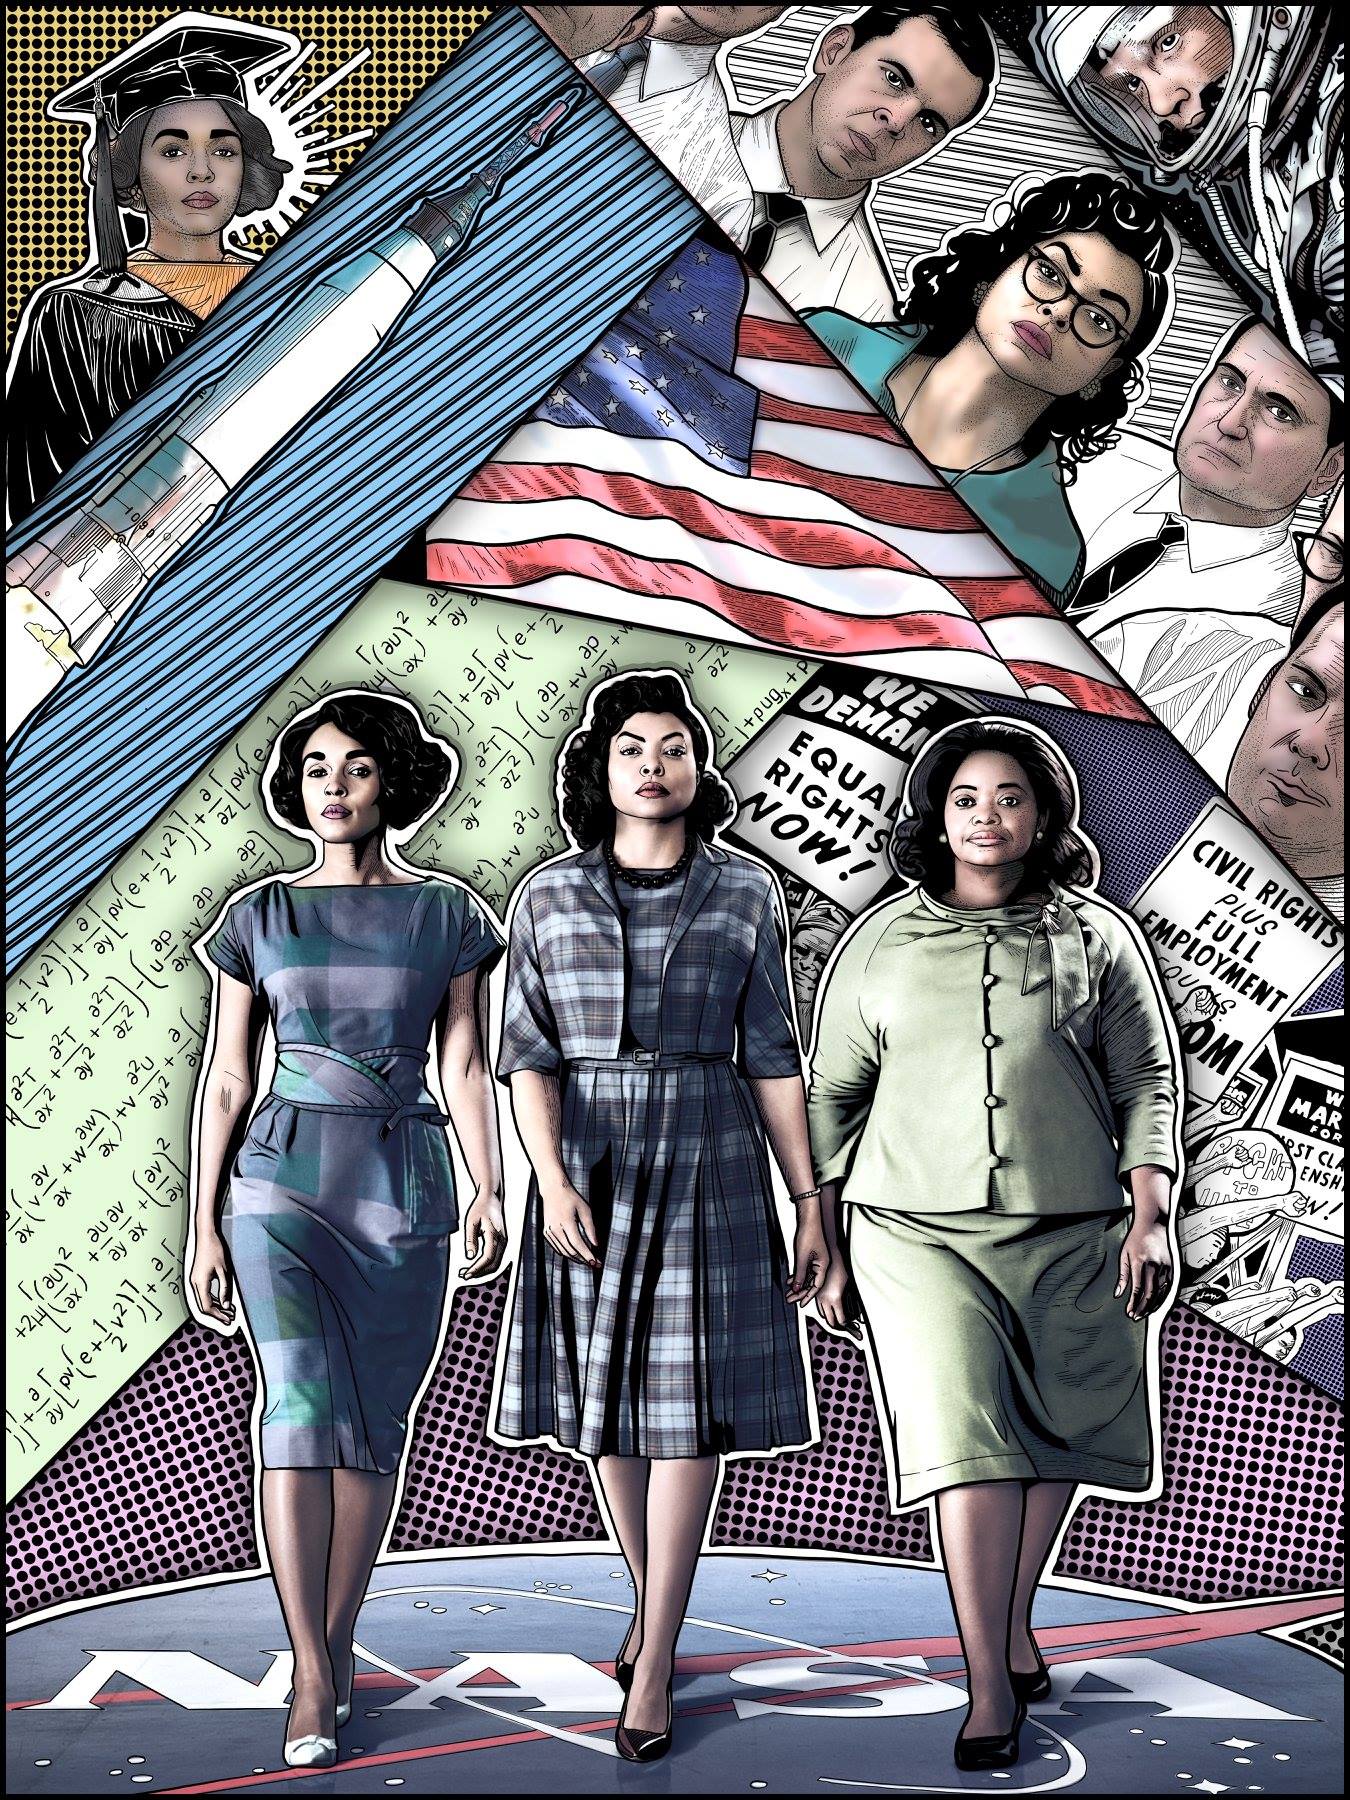 Hidden Figures Tells a Heroic Story, But Not the One They Deserve Sojourners